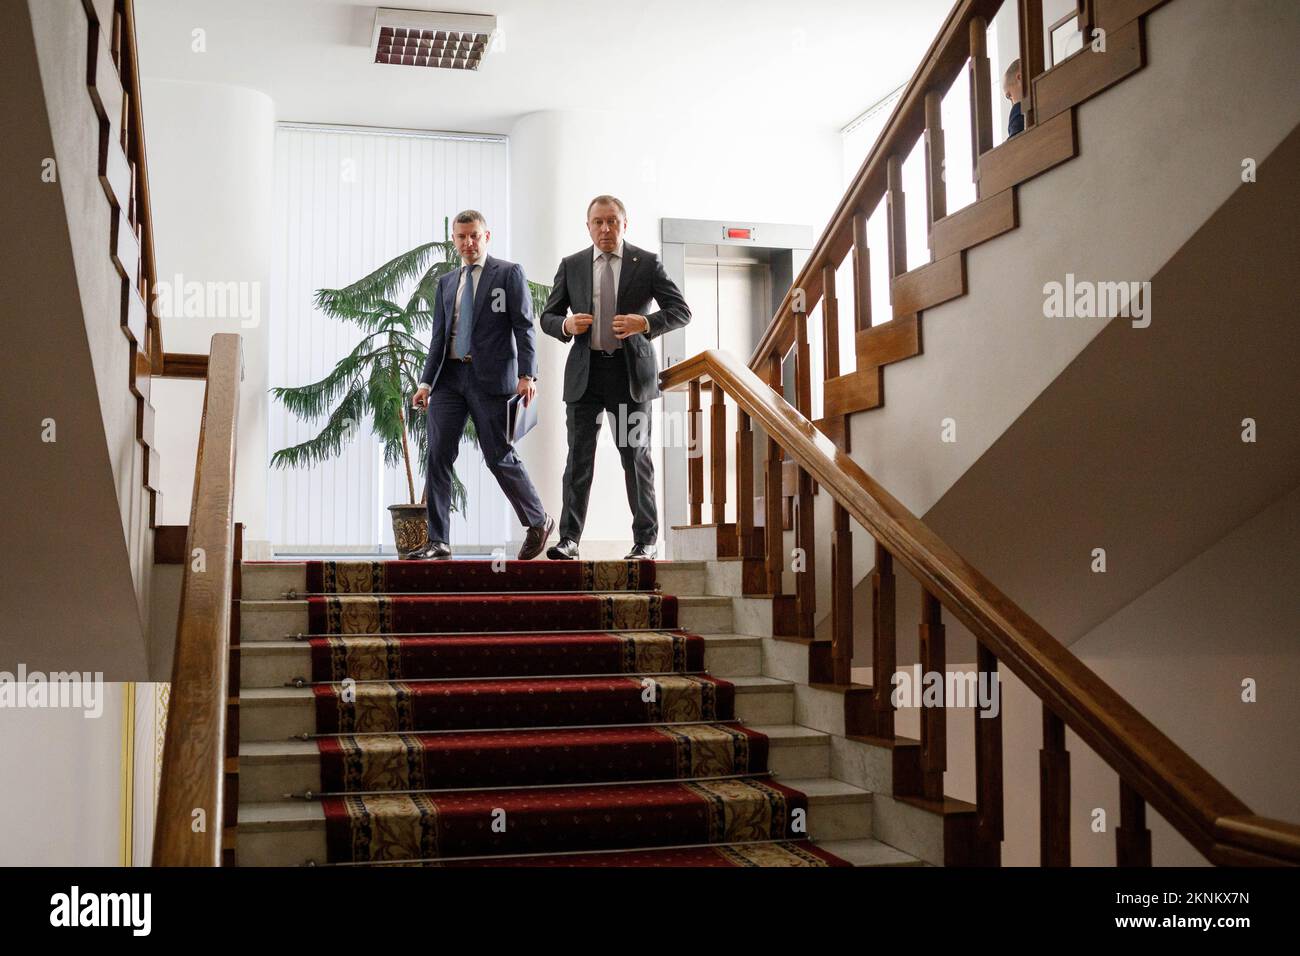 Vladimir Makei (or Uladzimir Makiej), the Minister of Foreign Affairs of the Republic of Belarus (left) and press-secretary of MFA Anatoly Glaz walk down to journalists before the interview starts. Vladimir Vladimirovich Makei (or Uladzimir Makiej) died in Minsk on November 26, 2022. He was 64 years old. There is no information that he had a chronic illness. Belarusian authorities did not state his cause of death. Makei served as the Minister of Foreign Affairs of Belarus from 2012 till his death in 2022. Since 2015 he has been perceived as a pretty democratic leader. After the mass protests i Stock Photo